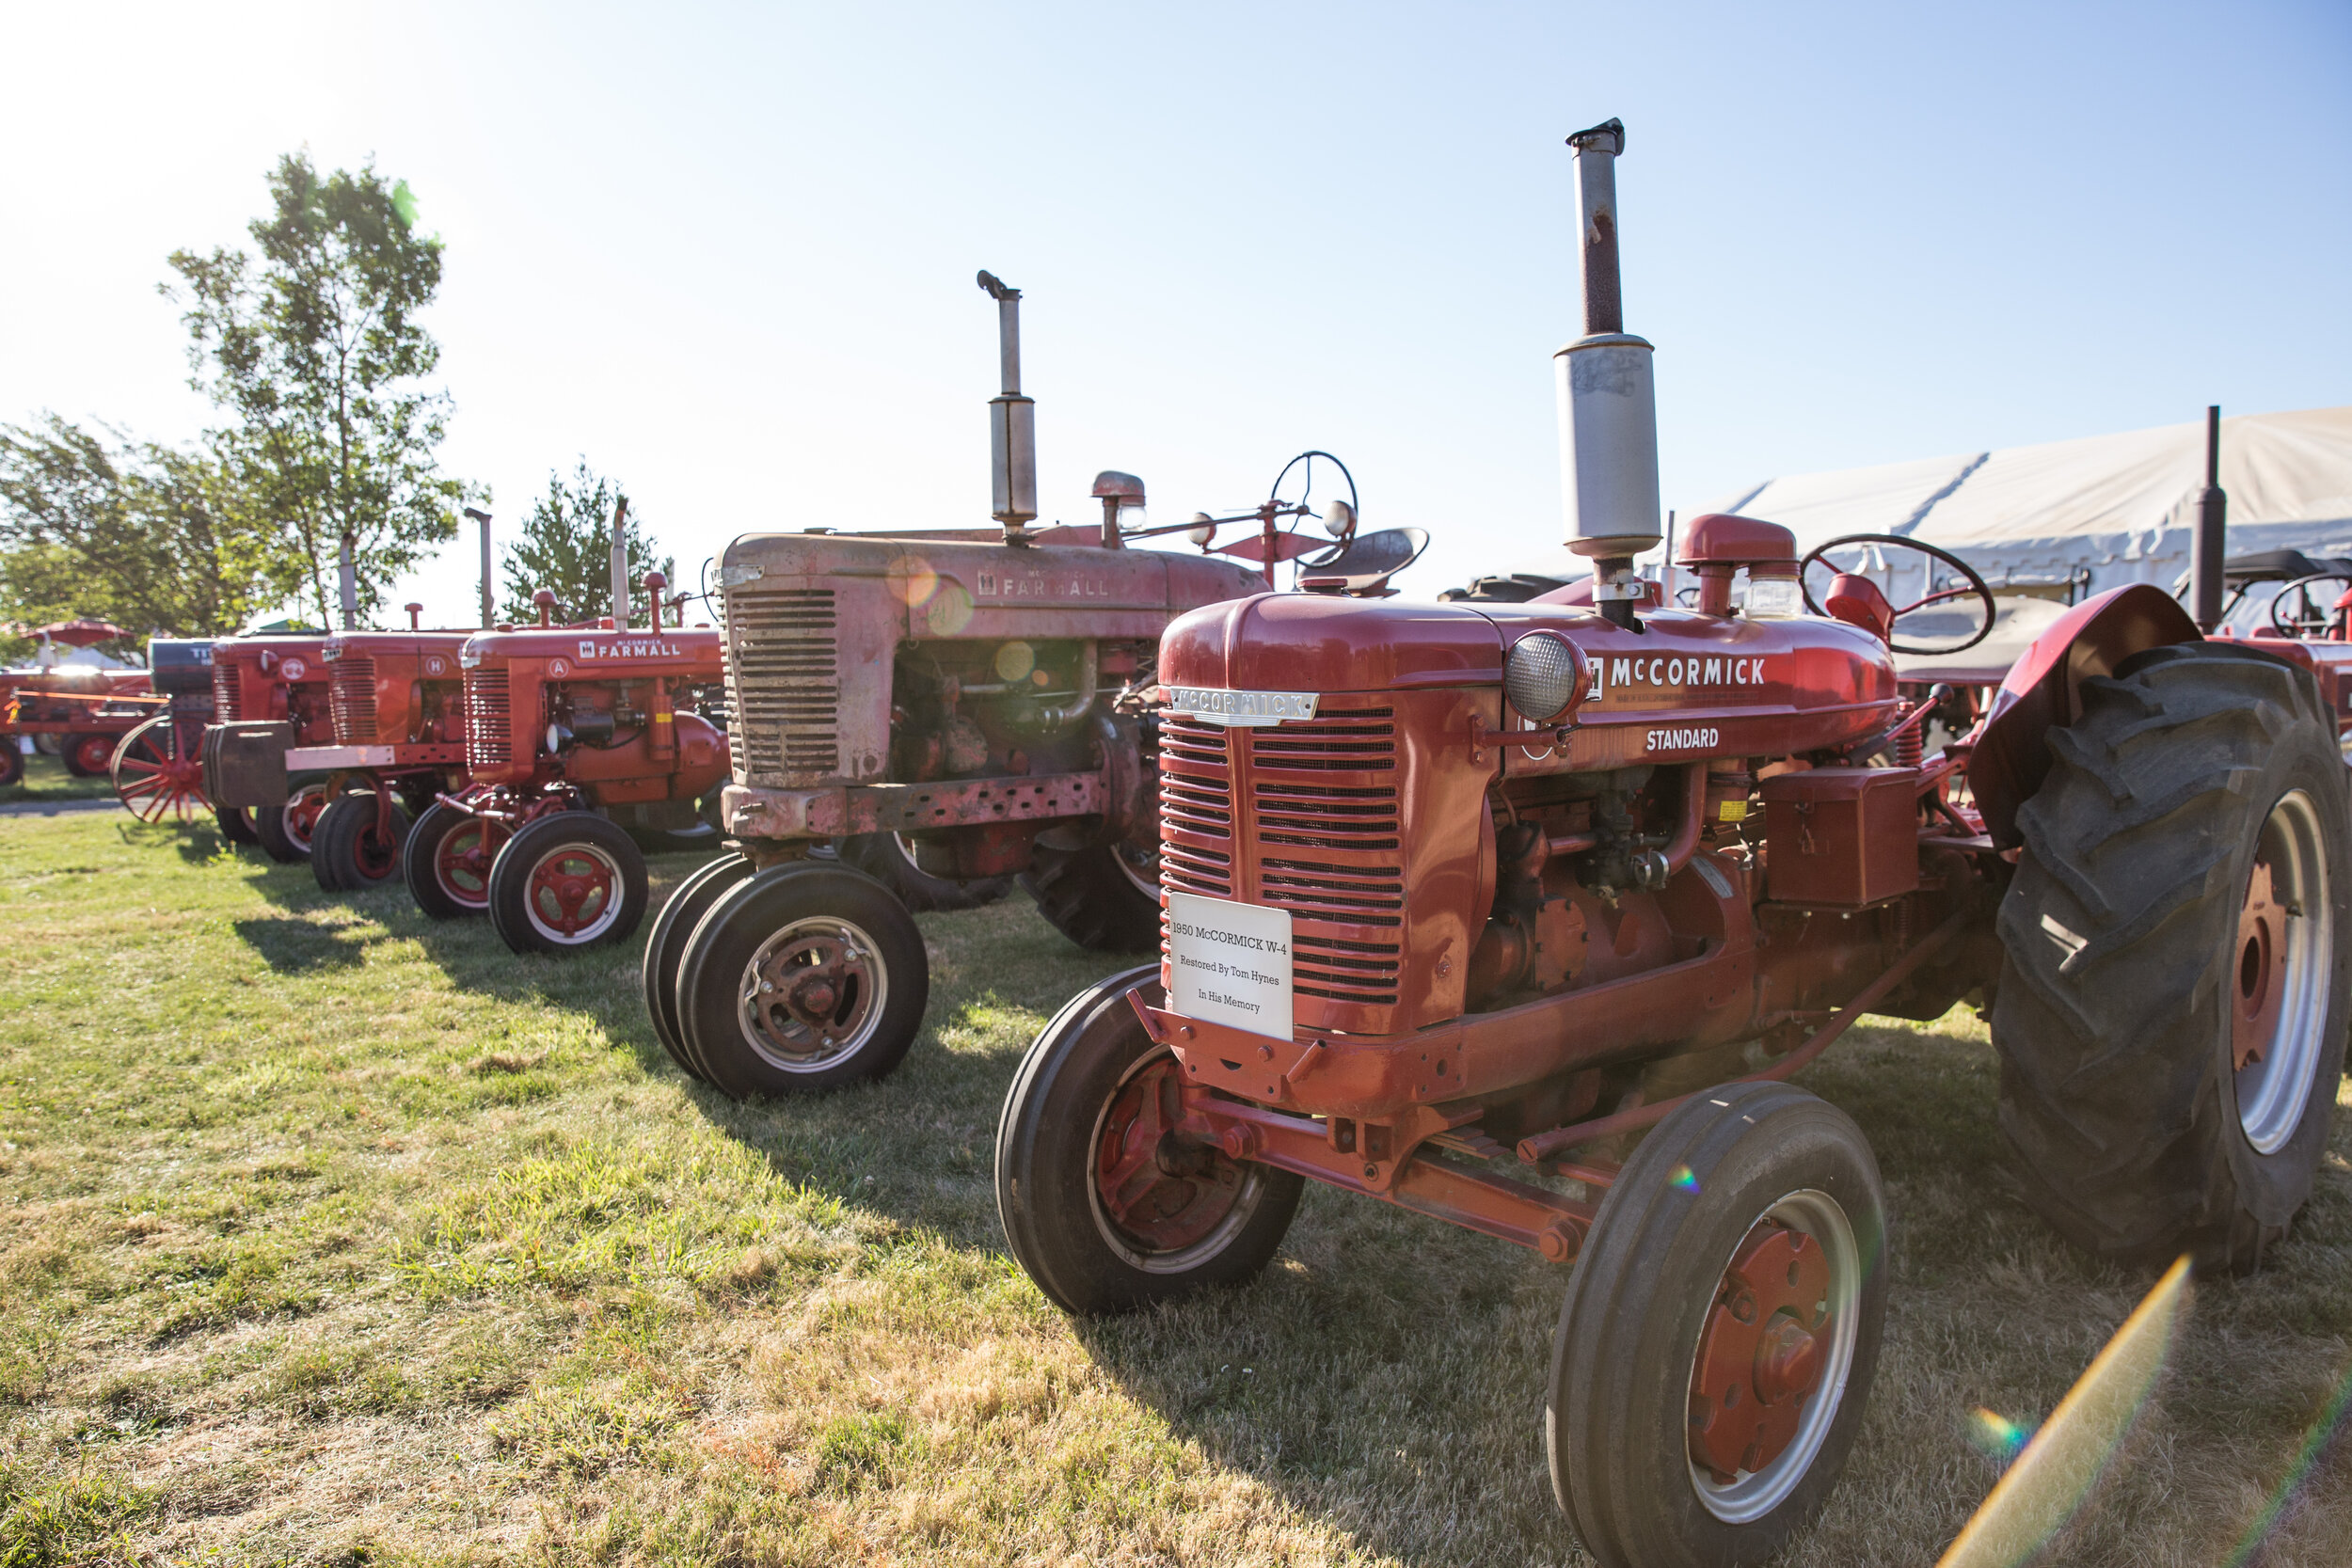 Oregon Steam Up opens this weekend - Keizertimes